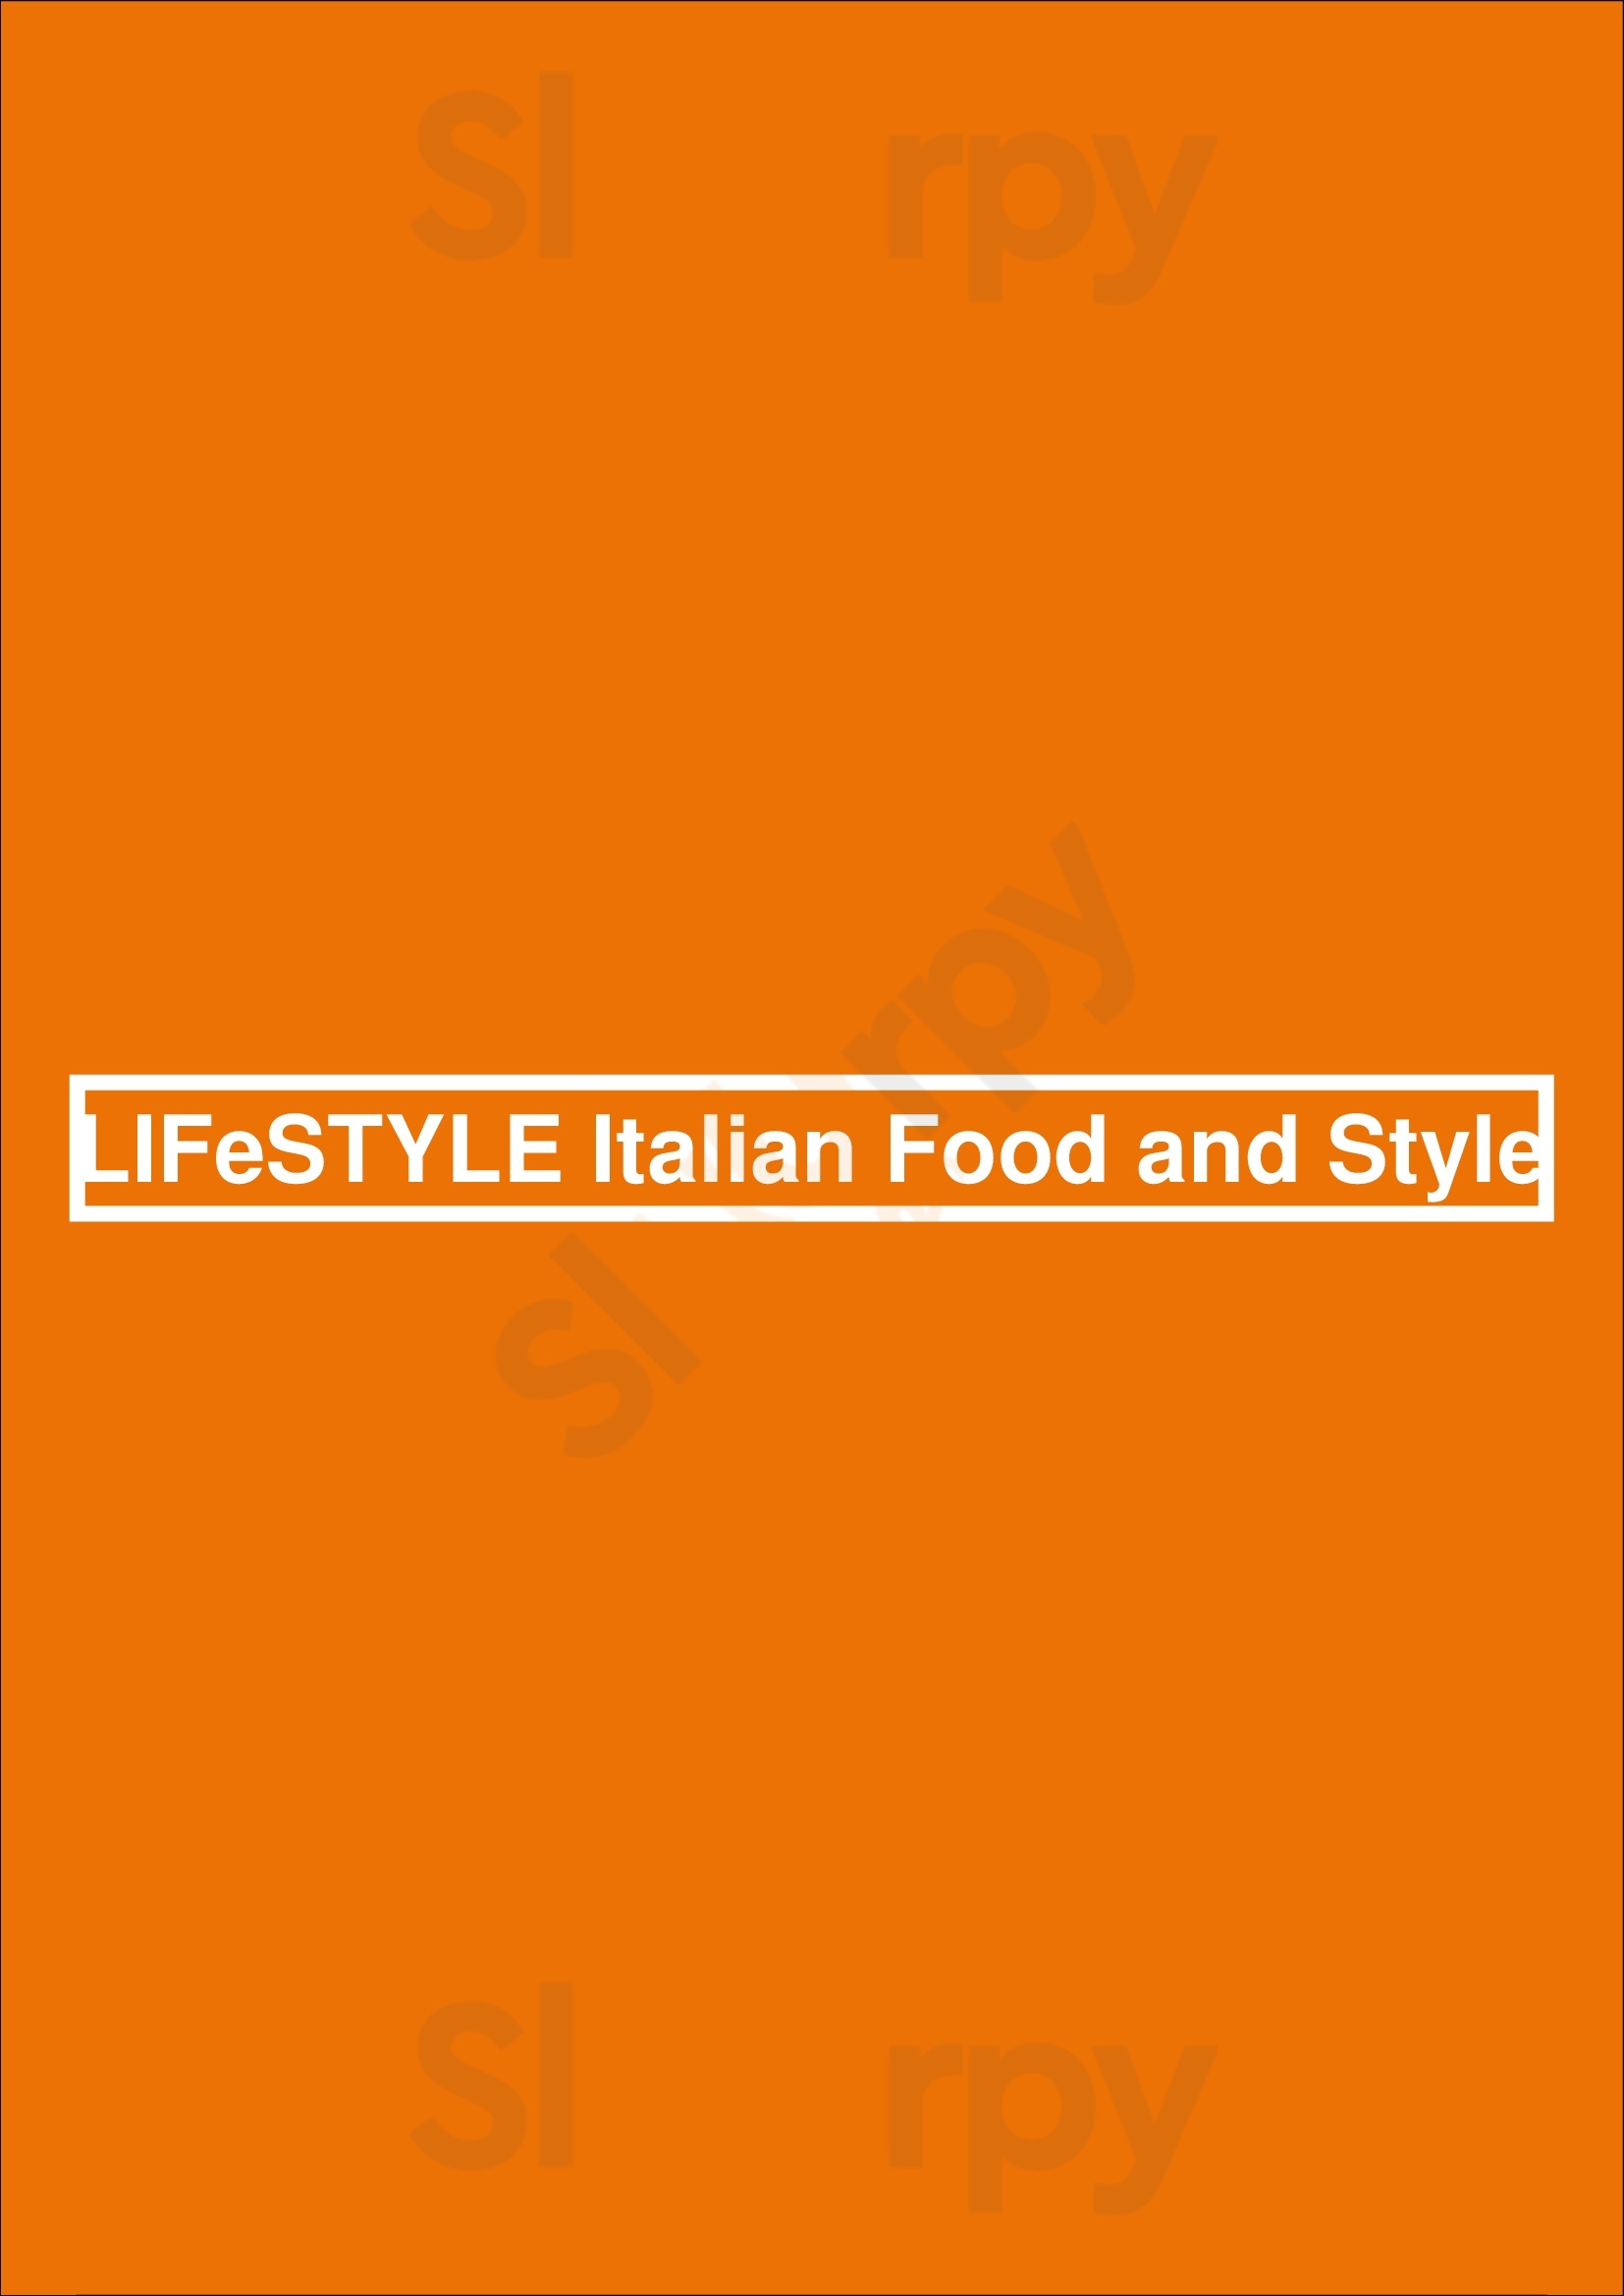 Lifestyle Italian Food And Style Bedford Menu - 1